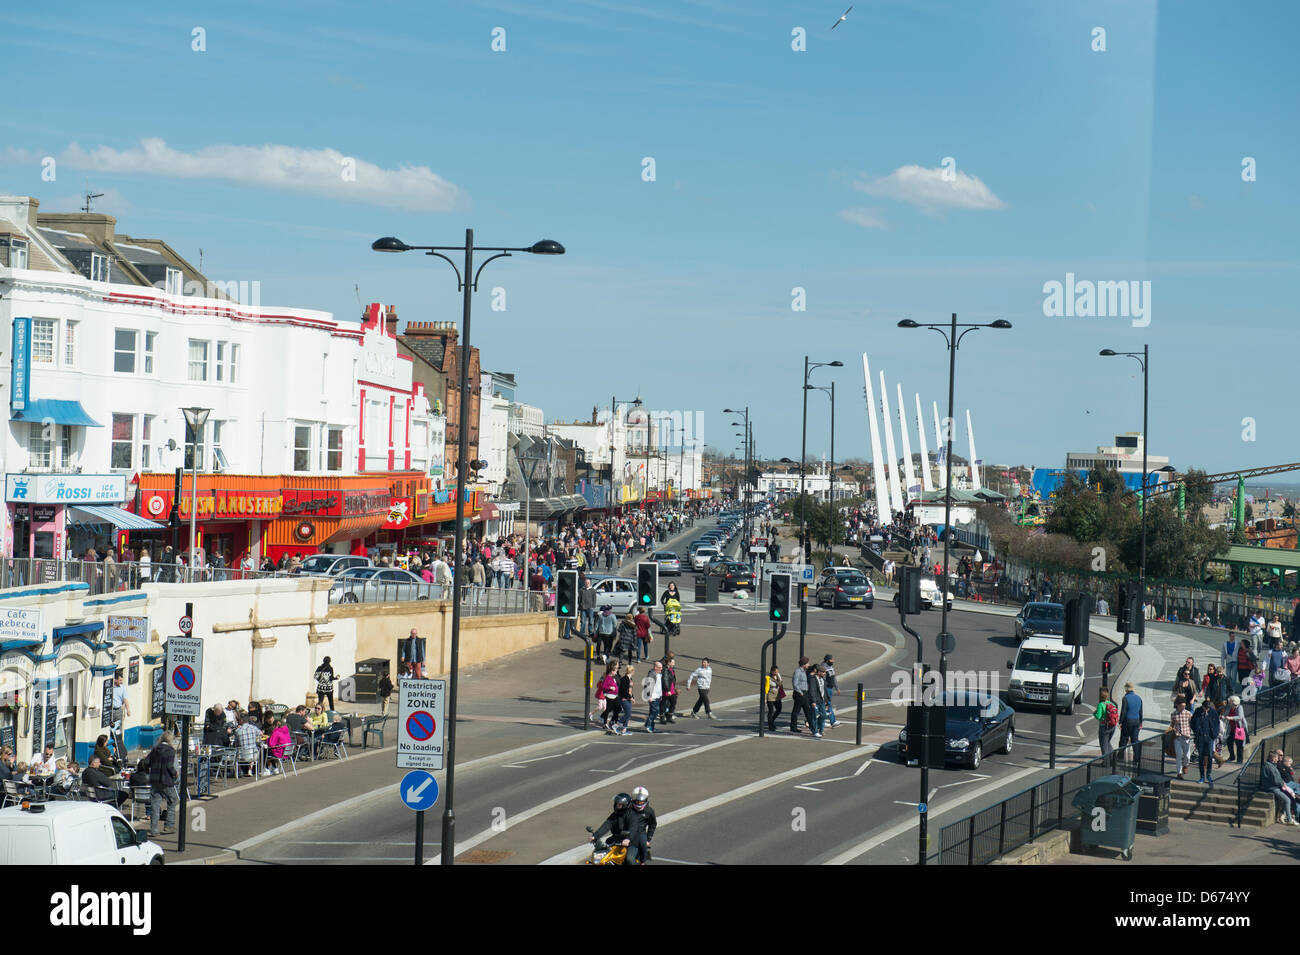 Southend, Essex. 14 April 2013. The predicted warm weather and sunshine eventually arrives. A large number of people went to the traditional seaside town of Southend on Sea. Marine Parade recently regenerated is now a shared space for pedestrians and vehicles but is causing controversy with safety campaigners. Allsorts Stock Photo/Alamy Live News Stock Photo